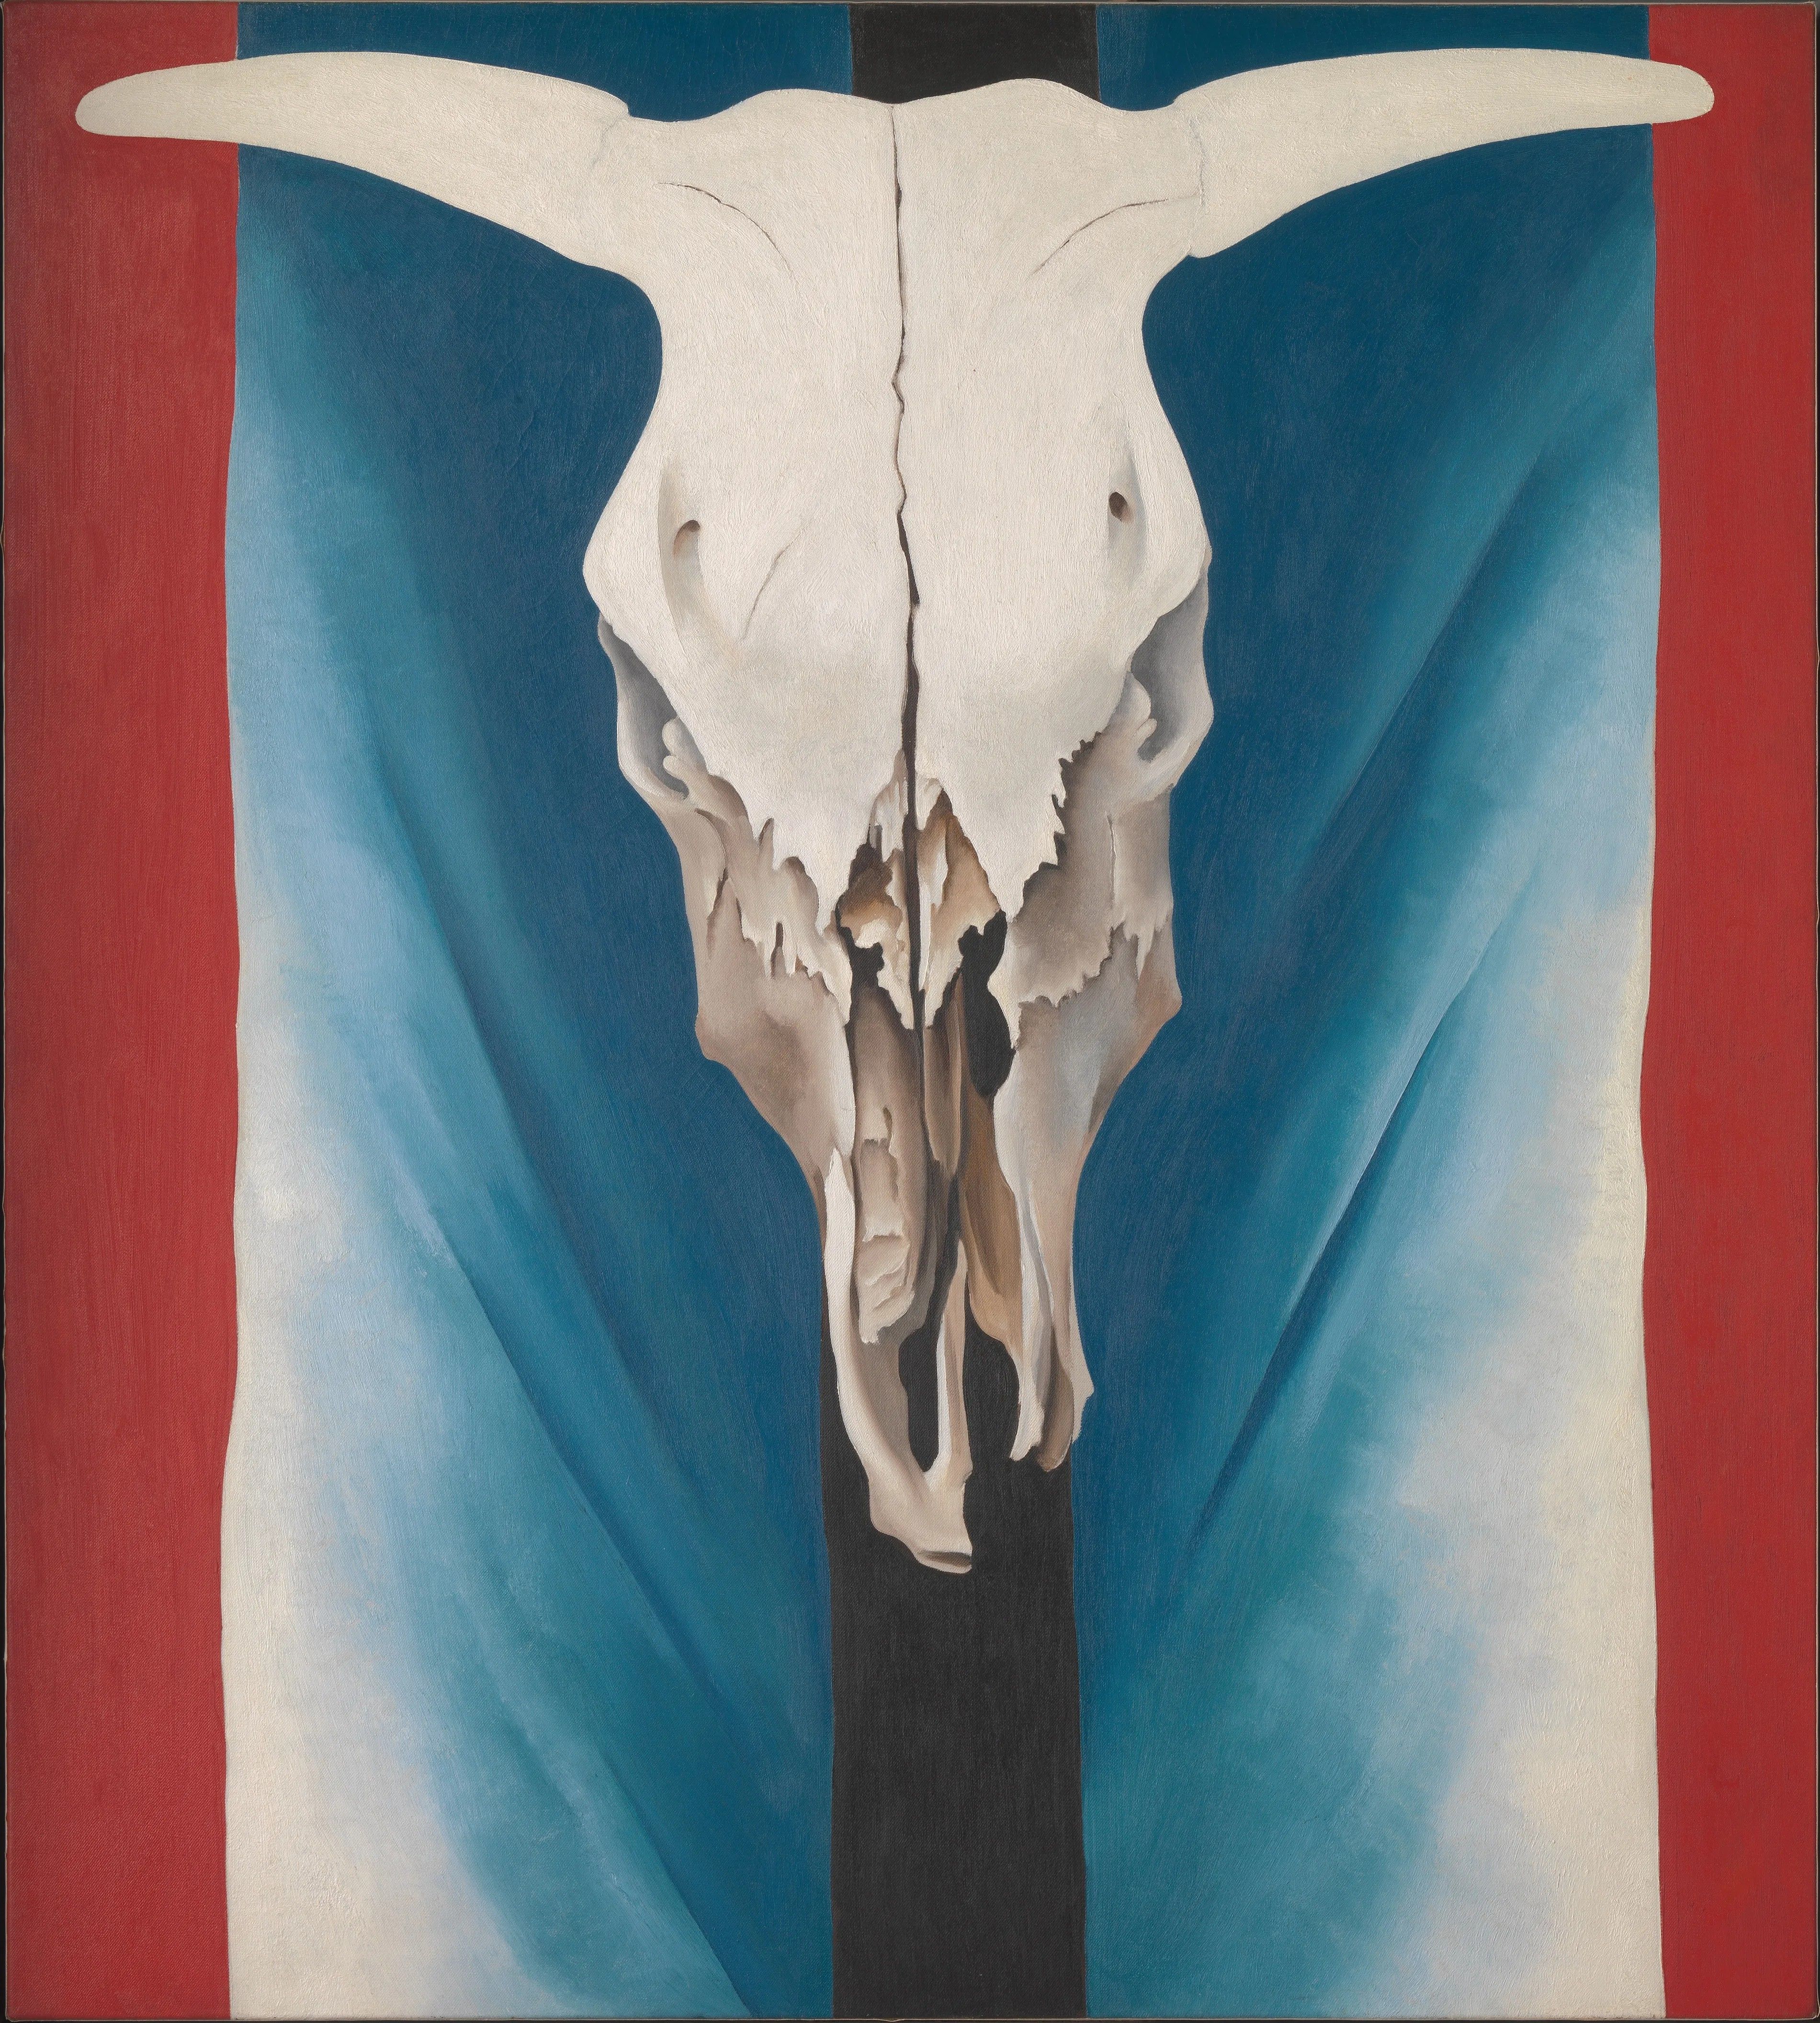 Georgia O'Keeffe. Cow's Skull: Red, White, and Blue. 1931. Source: metmuseum